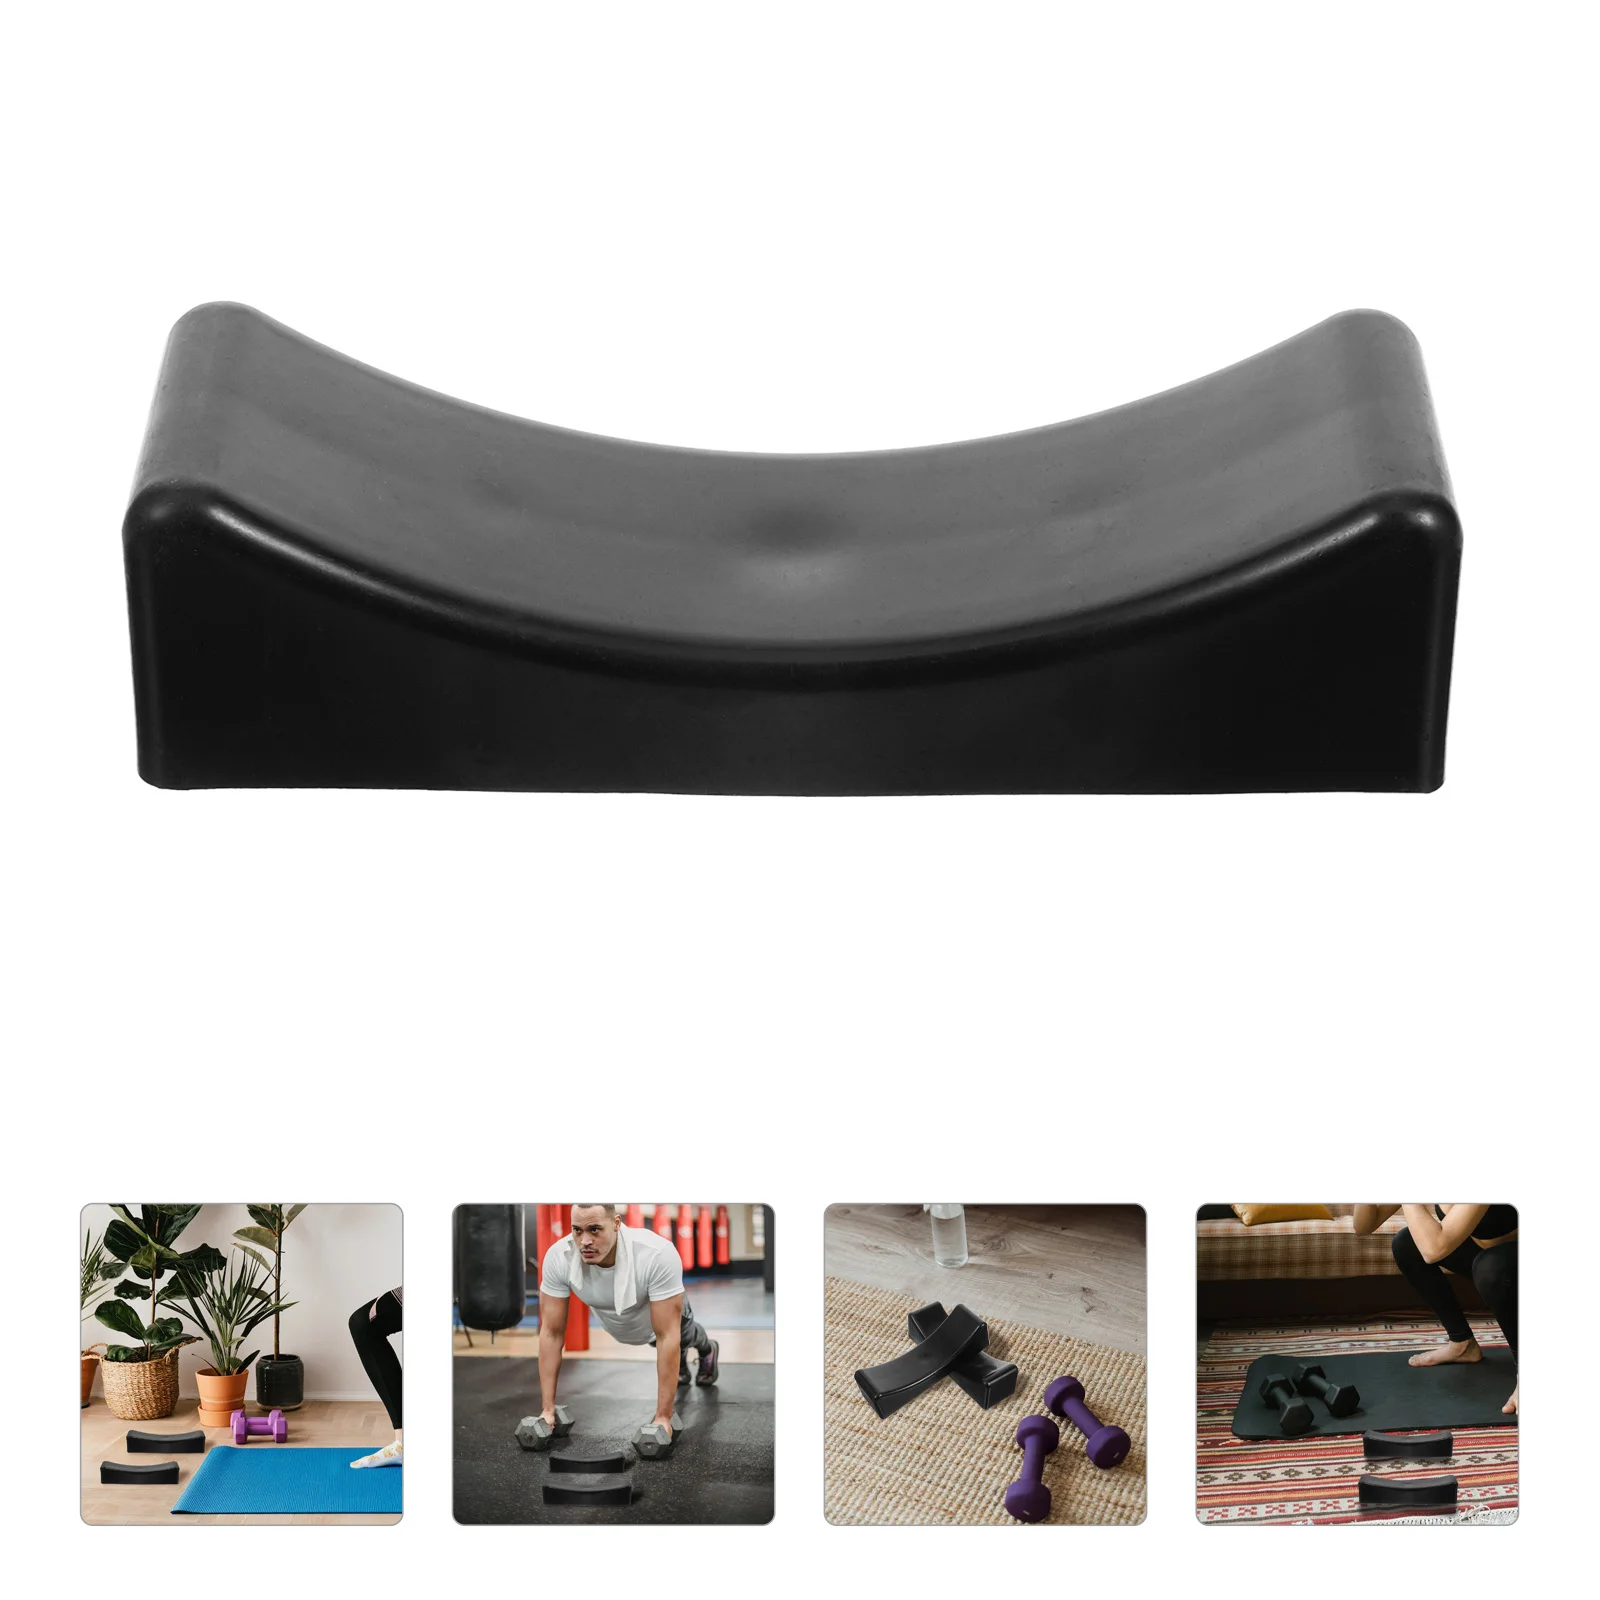 

Dumbbell Rack Weight Holder for Dumbbells Storage Stand Small Barbell Cushion Weightlifting Bracket Weights